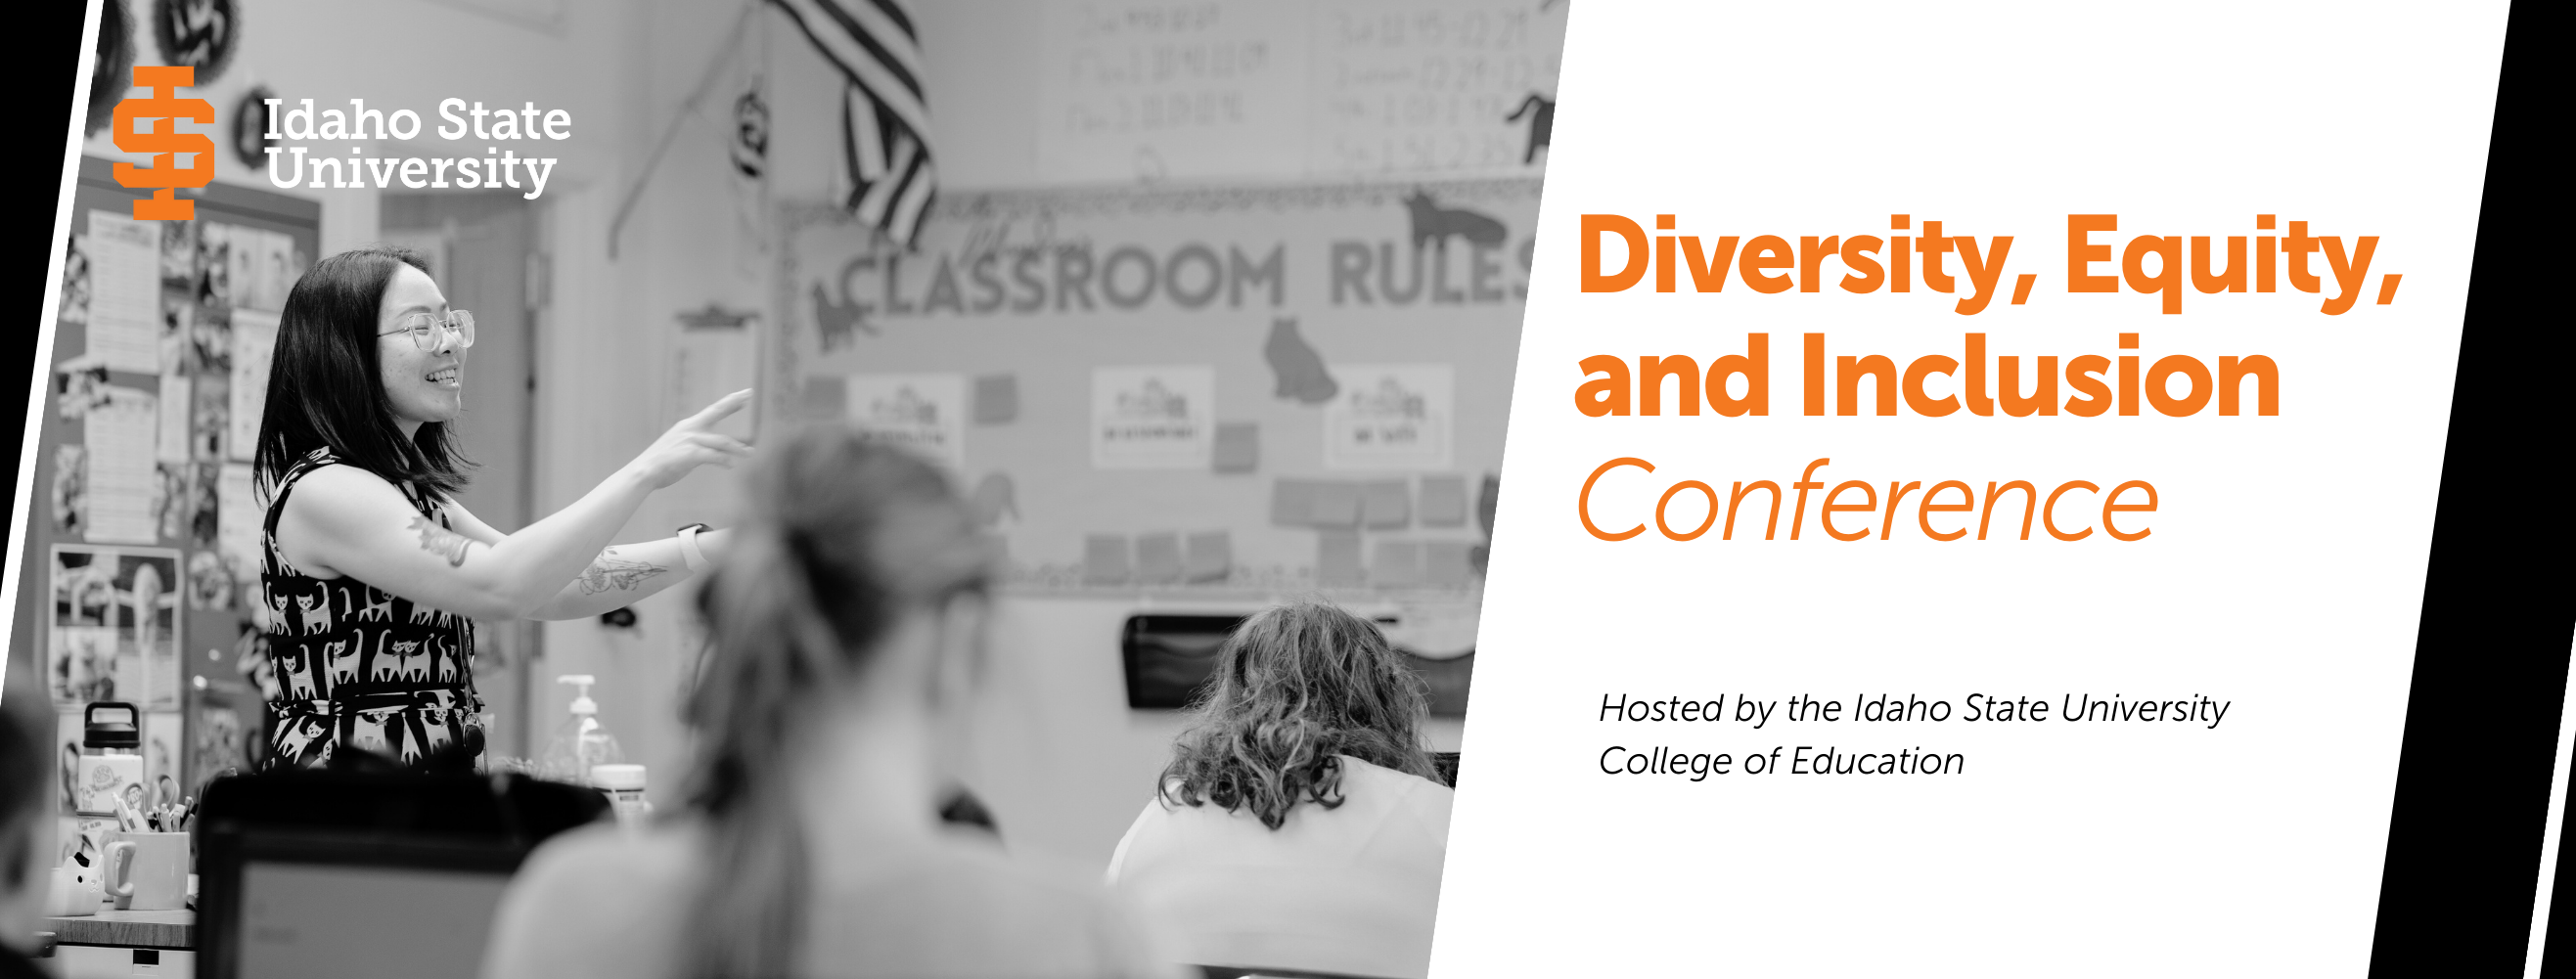 Diversity, Equity, and Inclusion Conference Header